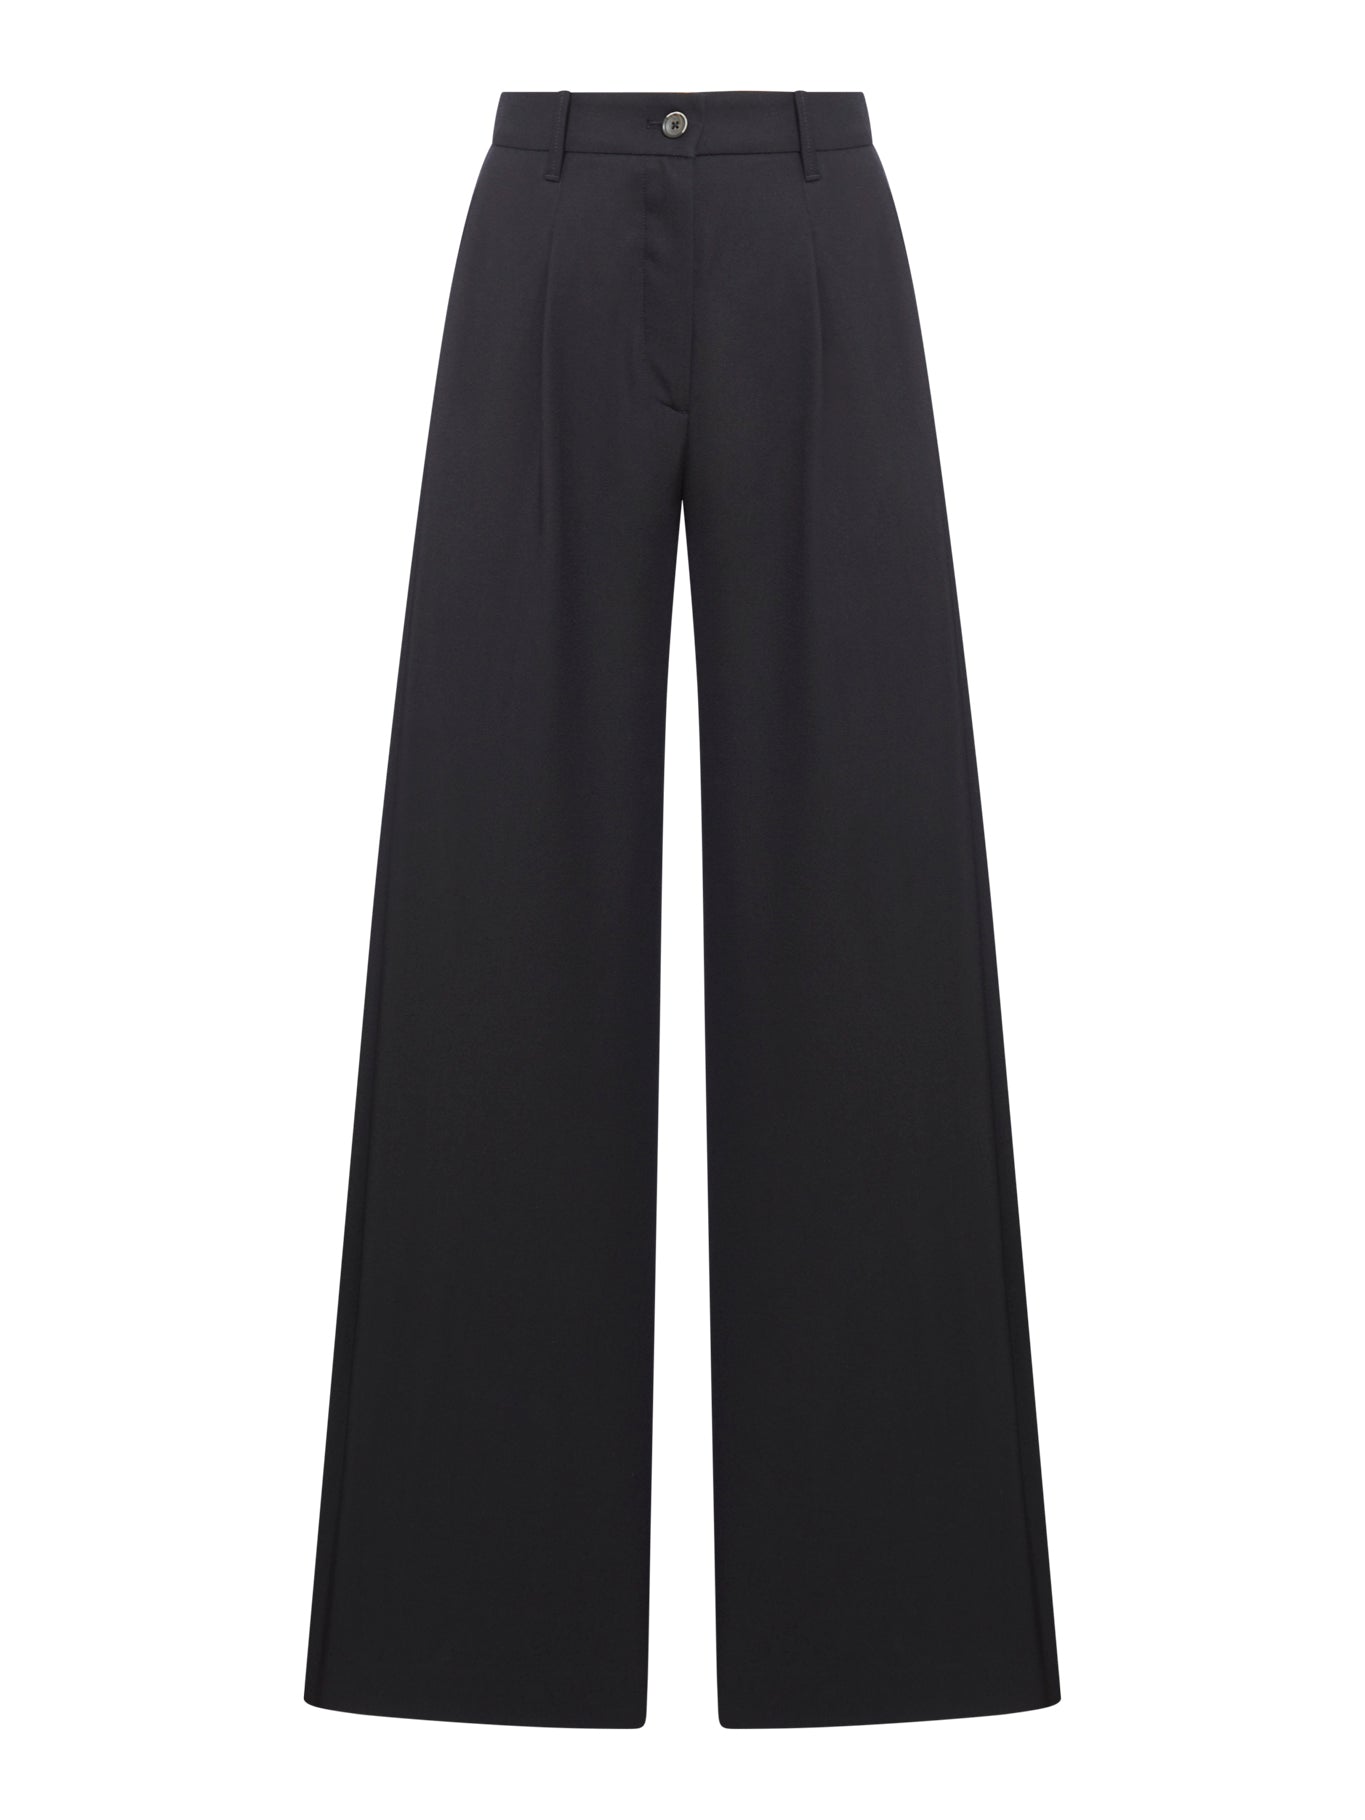 trousers with two pleats